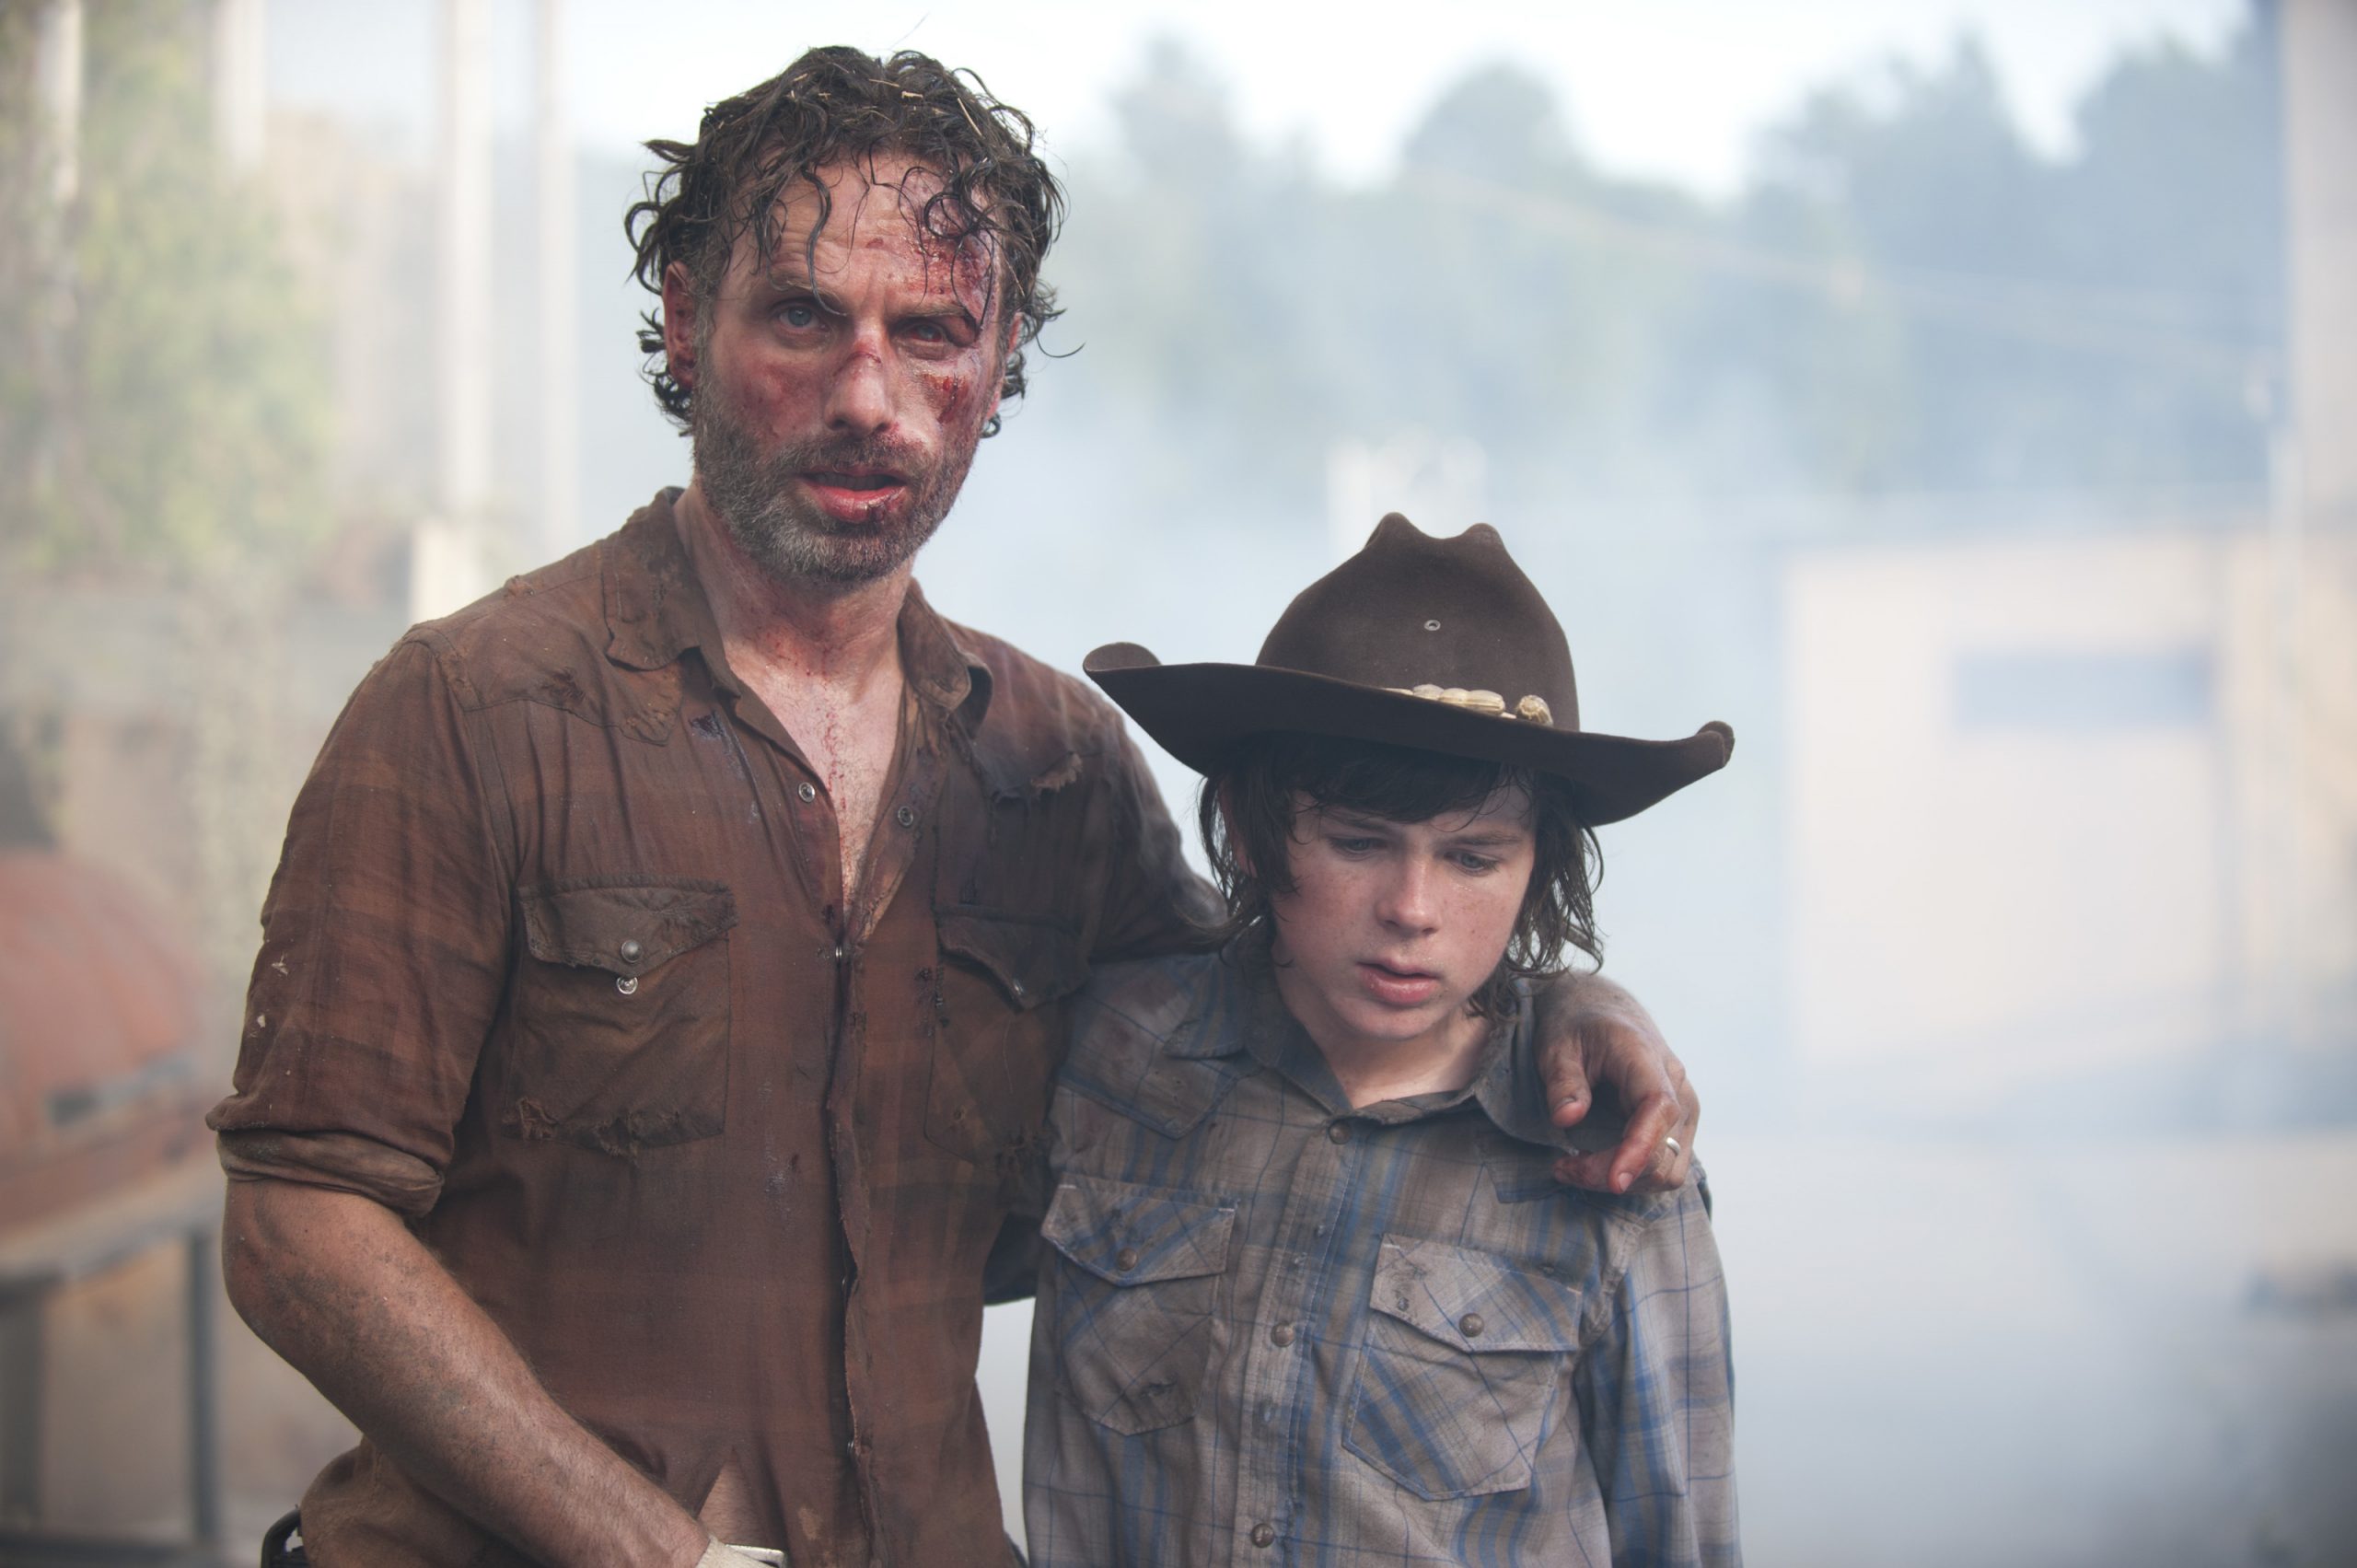 To show Carl with his father Rick who is the protagonist of the series